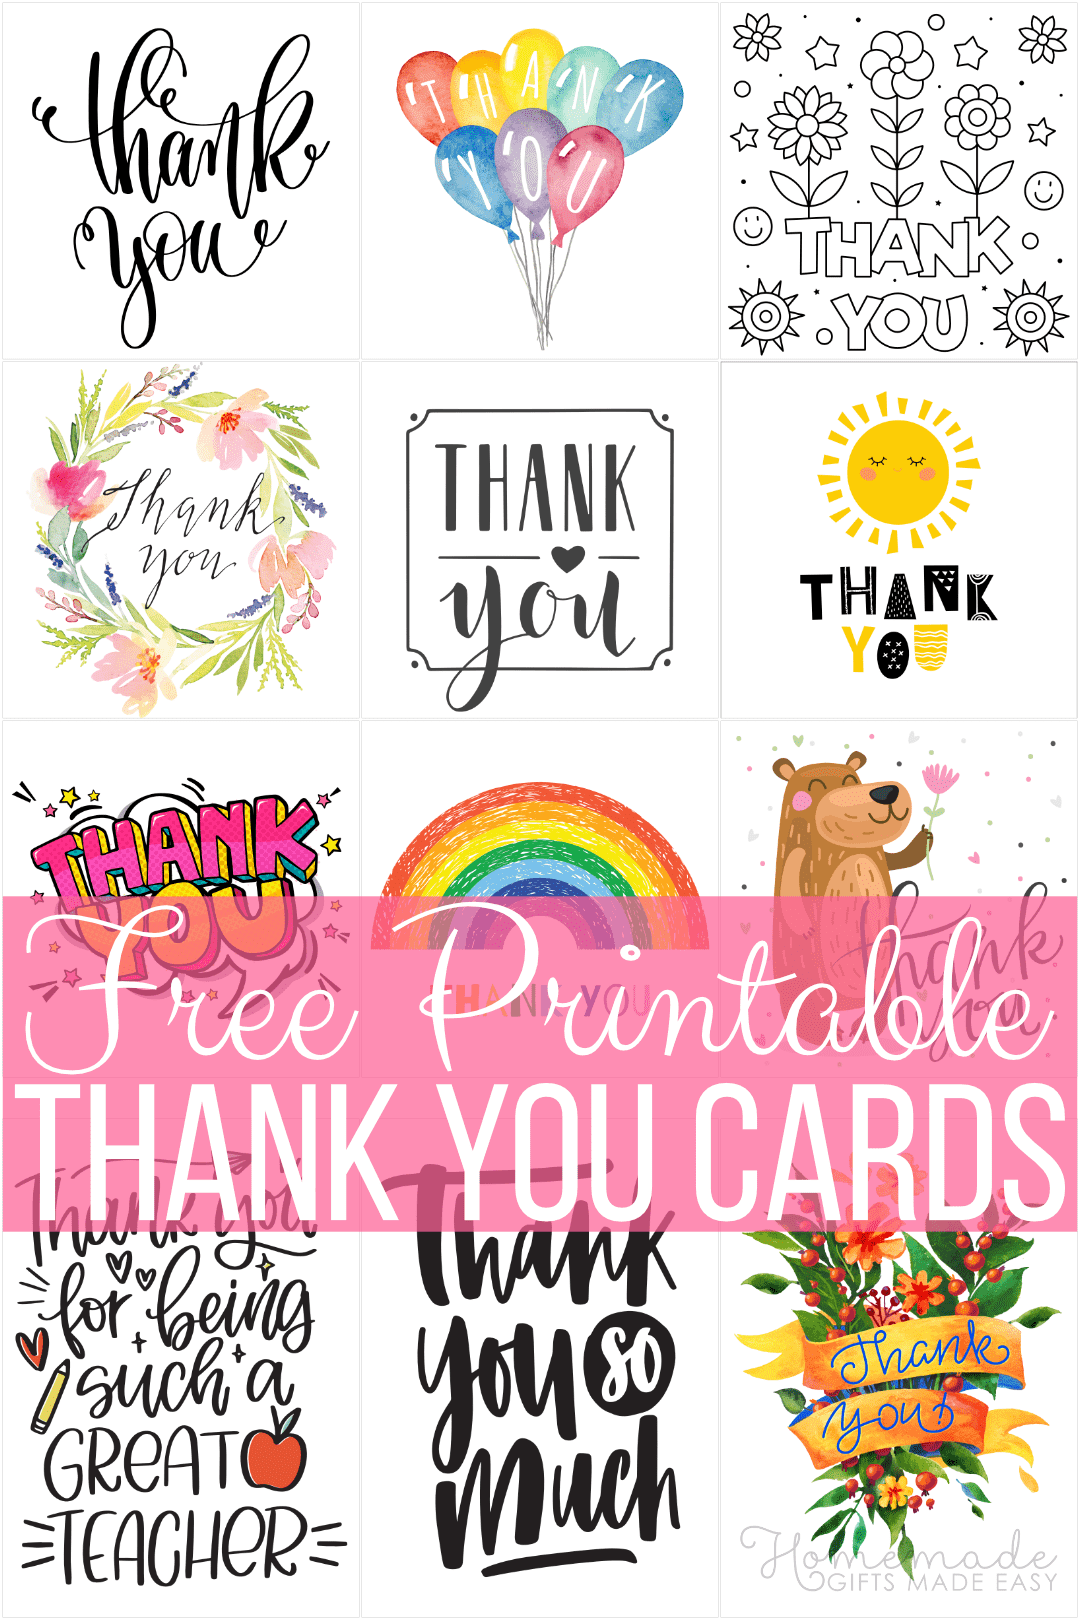 Free Printable Thank You Cards - Free Personalized Thank You Cards Printable